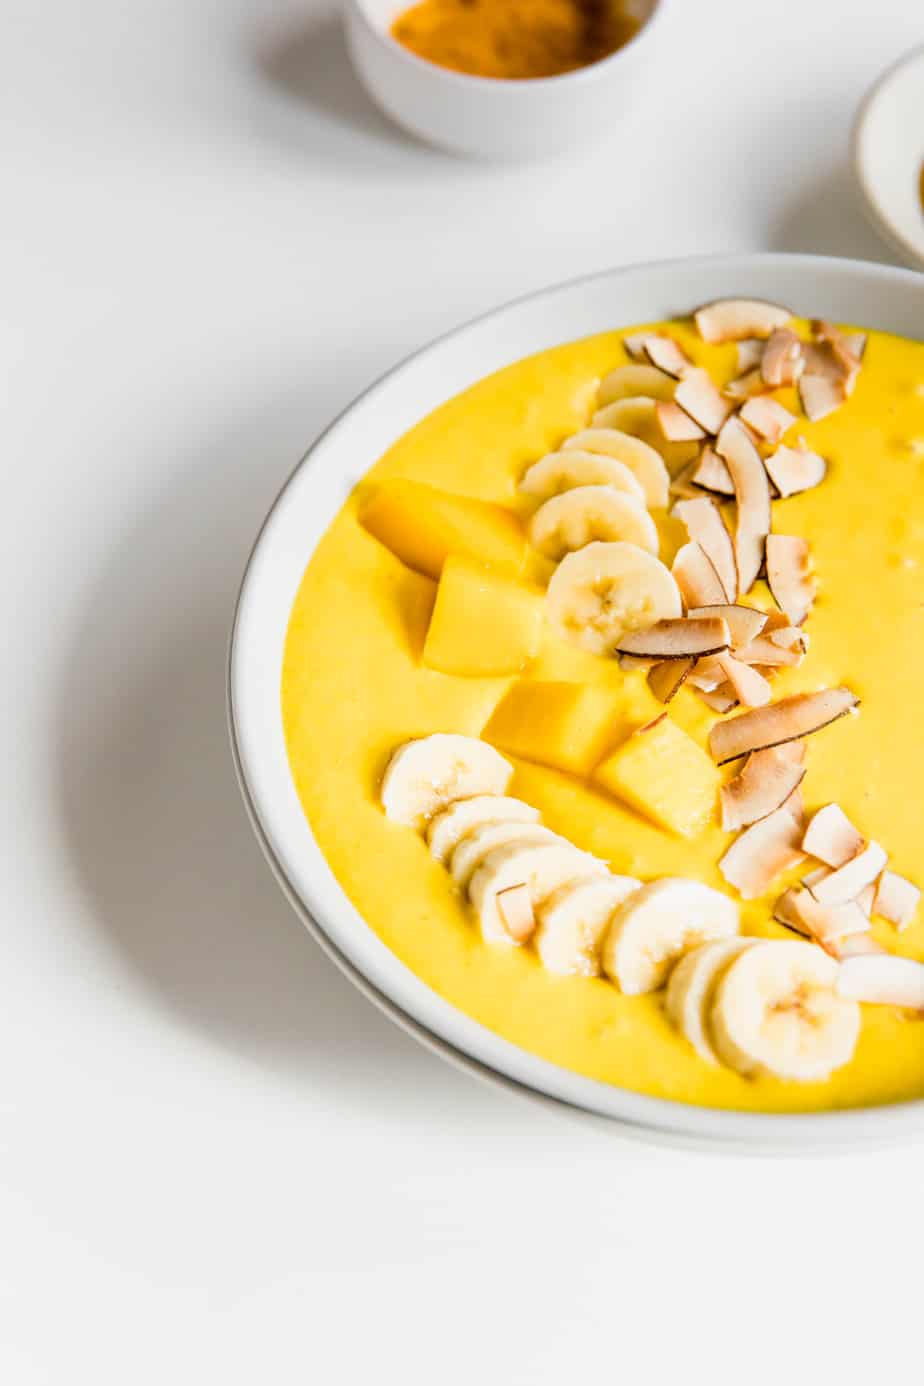 A smoothie bowl topped with chopped mango, banana, and coconut.